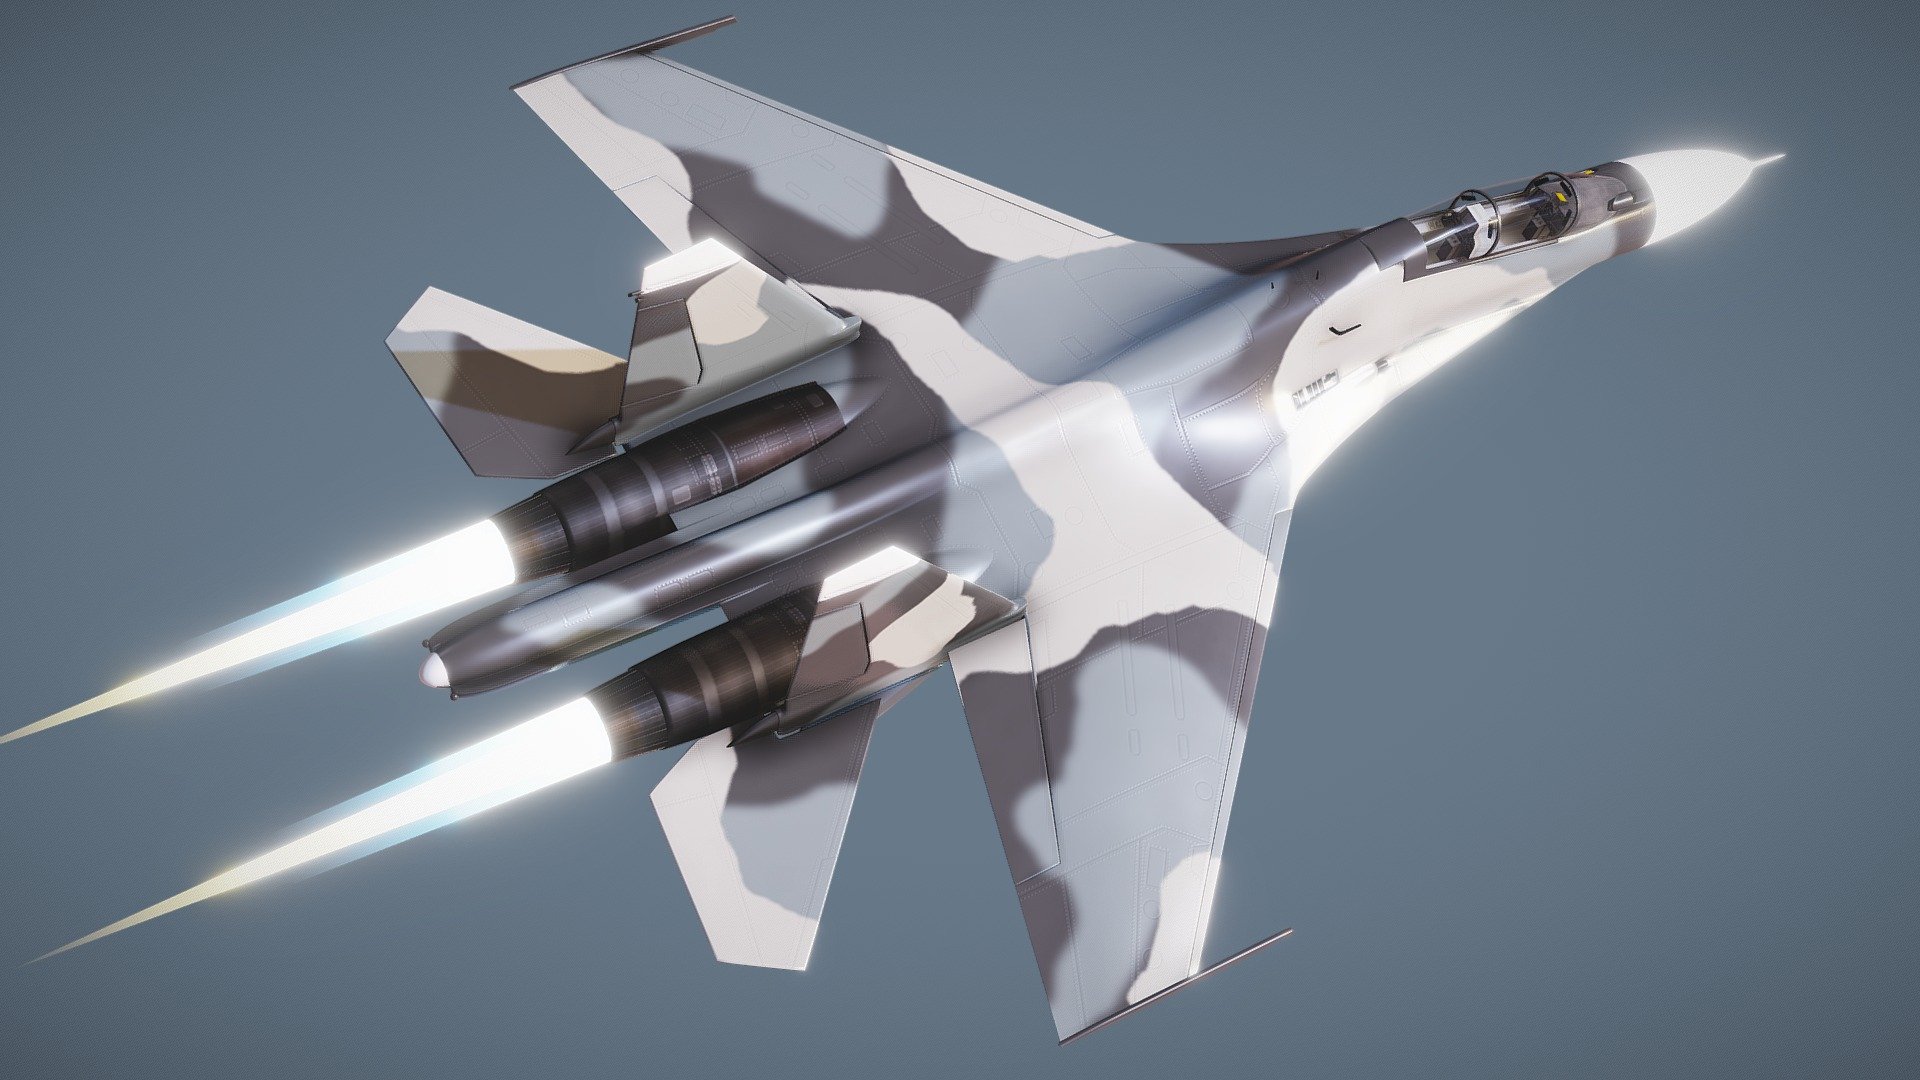 Sukhoi SU-30 multirole fighter aircraft

FBX Model:
separate objects -
plane,
cabine,
engine flame

PNG Textures 4096 x 4096:
plane diffusse,
plane metalness,
plane roughness,
plane bump,
plane ao,
cabin diffuse - SU-30 aircraft - Buy Royalty Free 3D model by VirtualBG (@undereality) 3d model